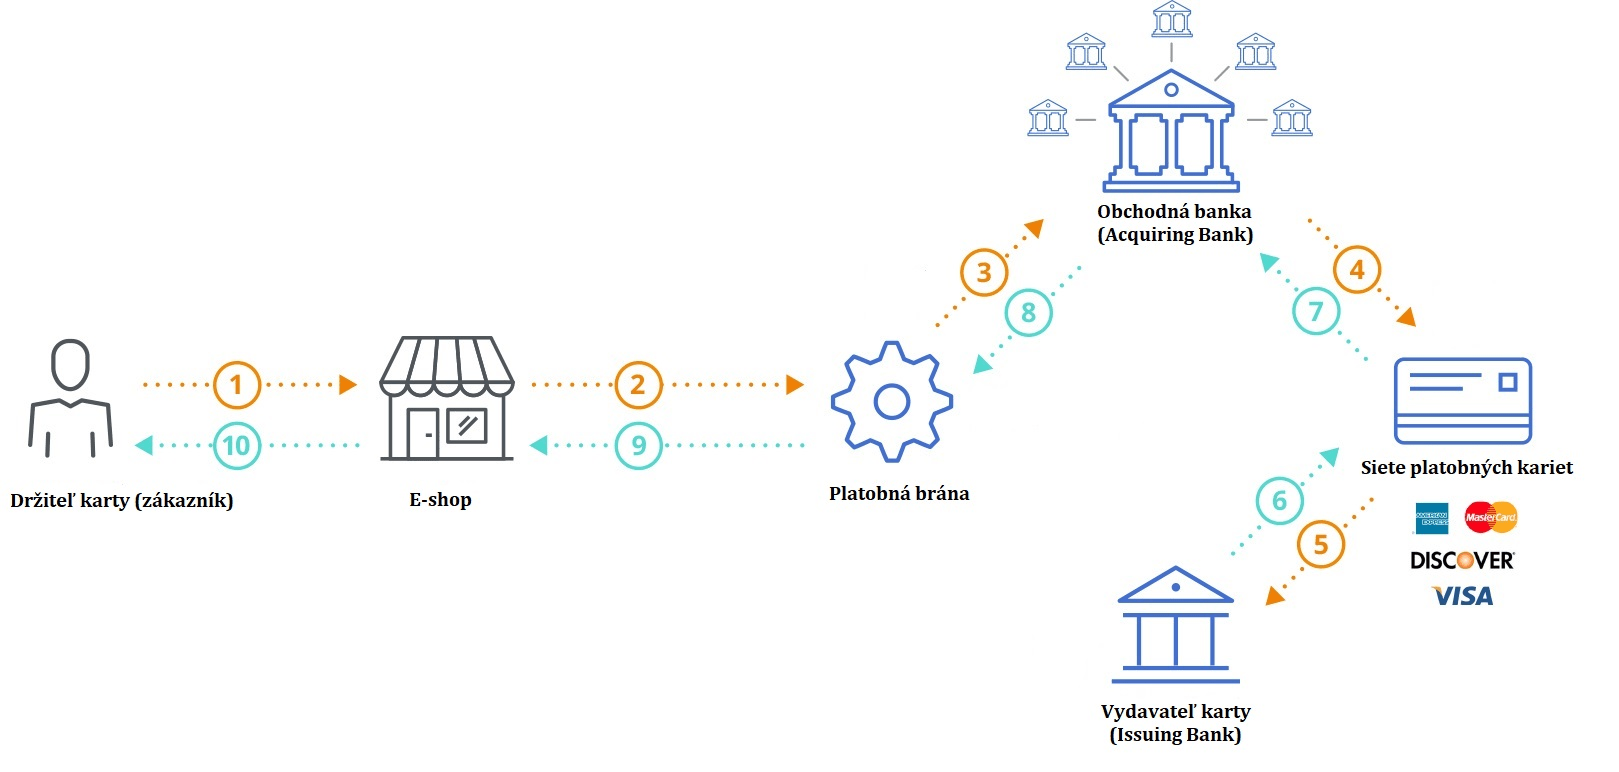 operation of payment gateways